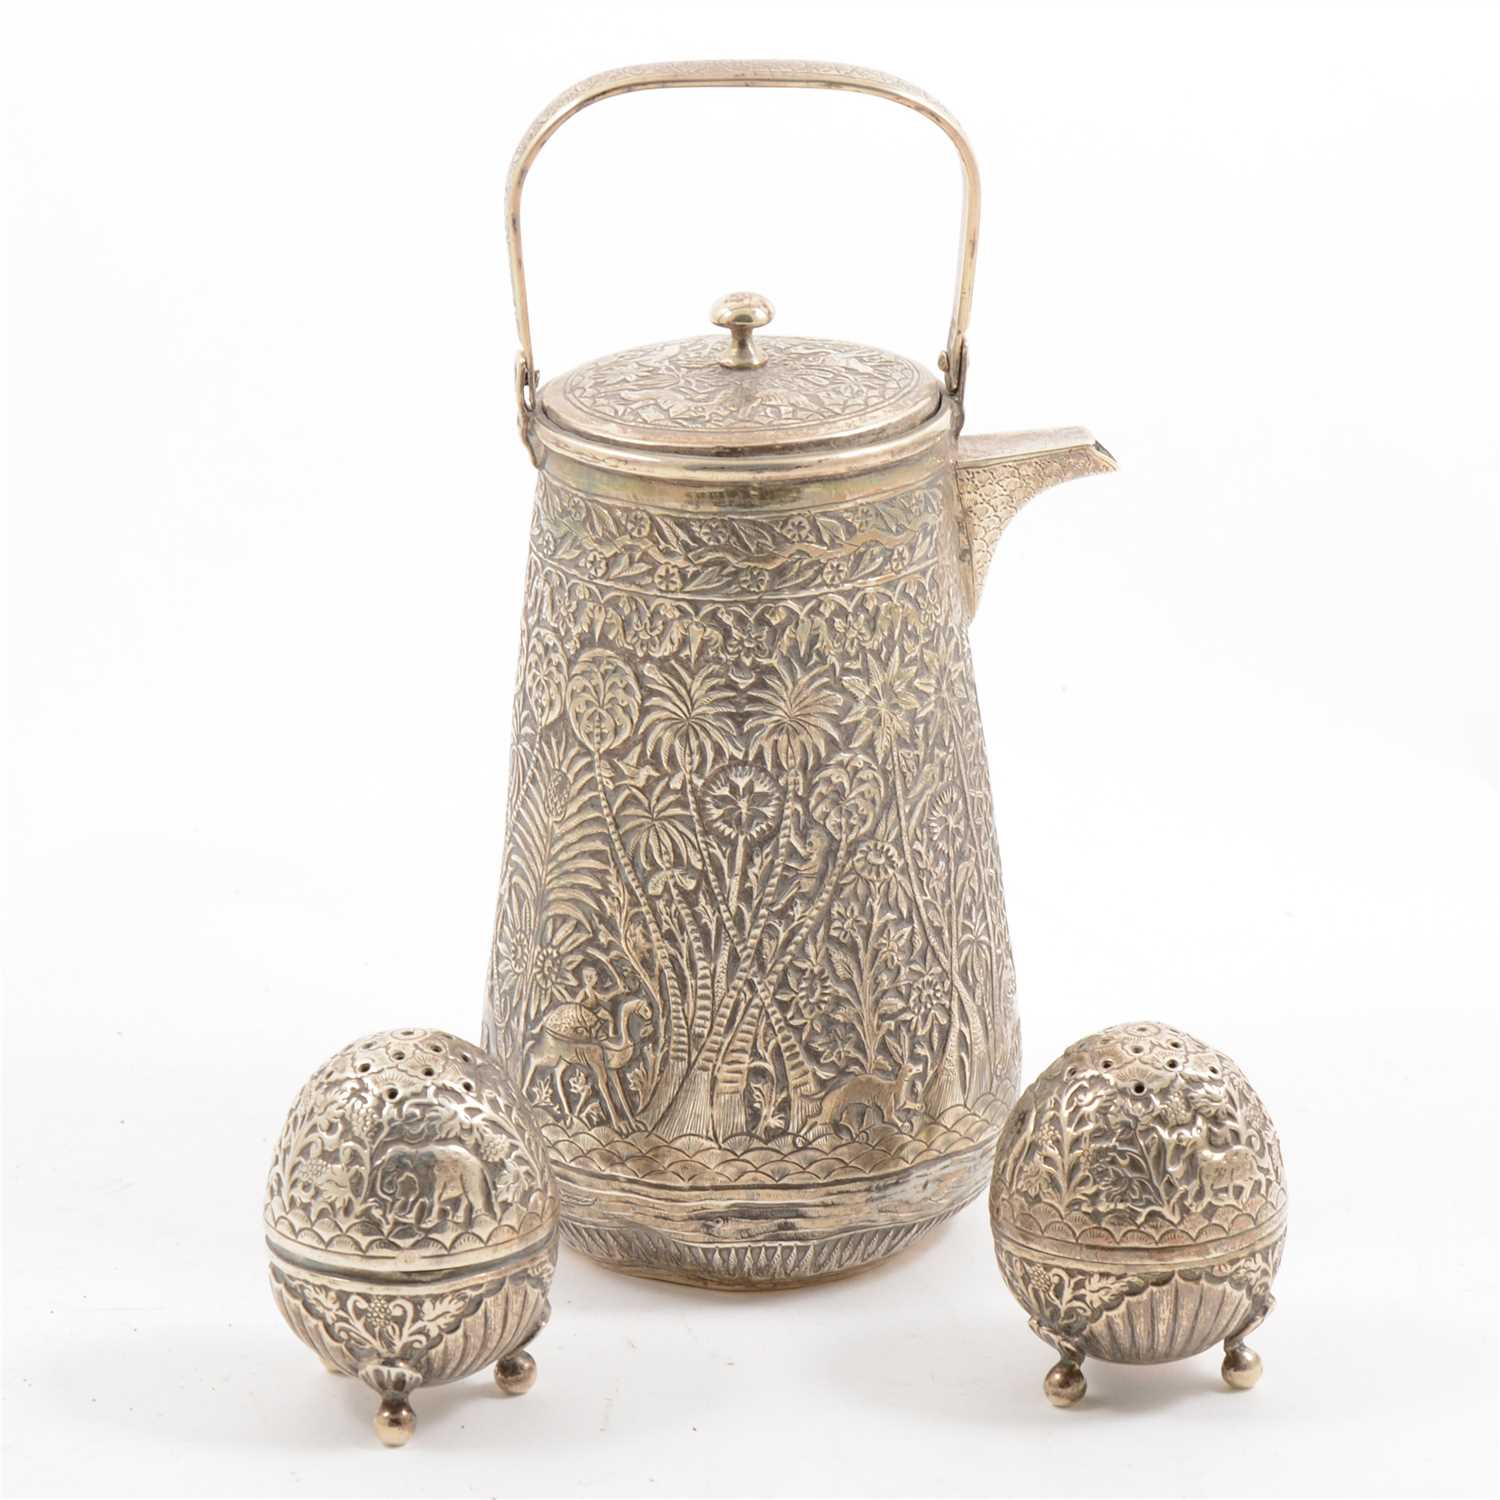 Lot 117 - Indian white metal hot water jug, and two white metal egg-shaped cruets